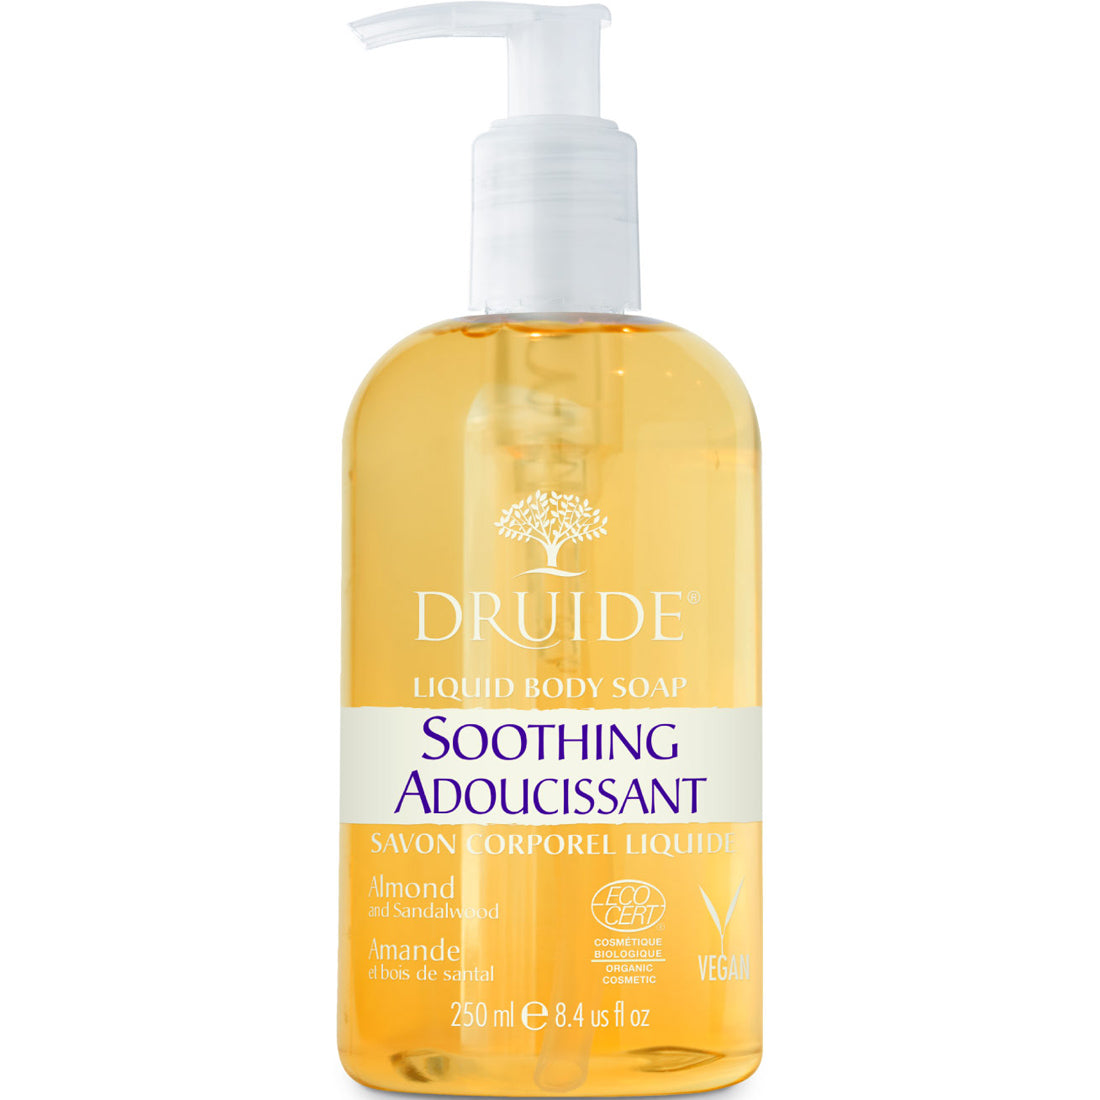 Druide Soothing Body Soap, Almond, 250ml